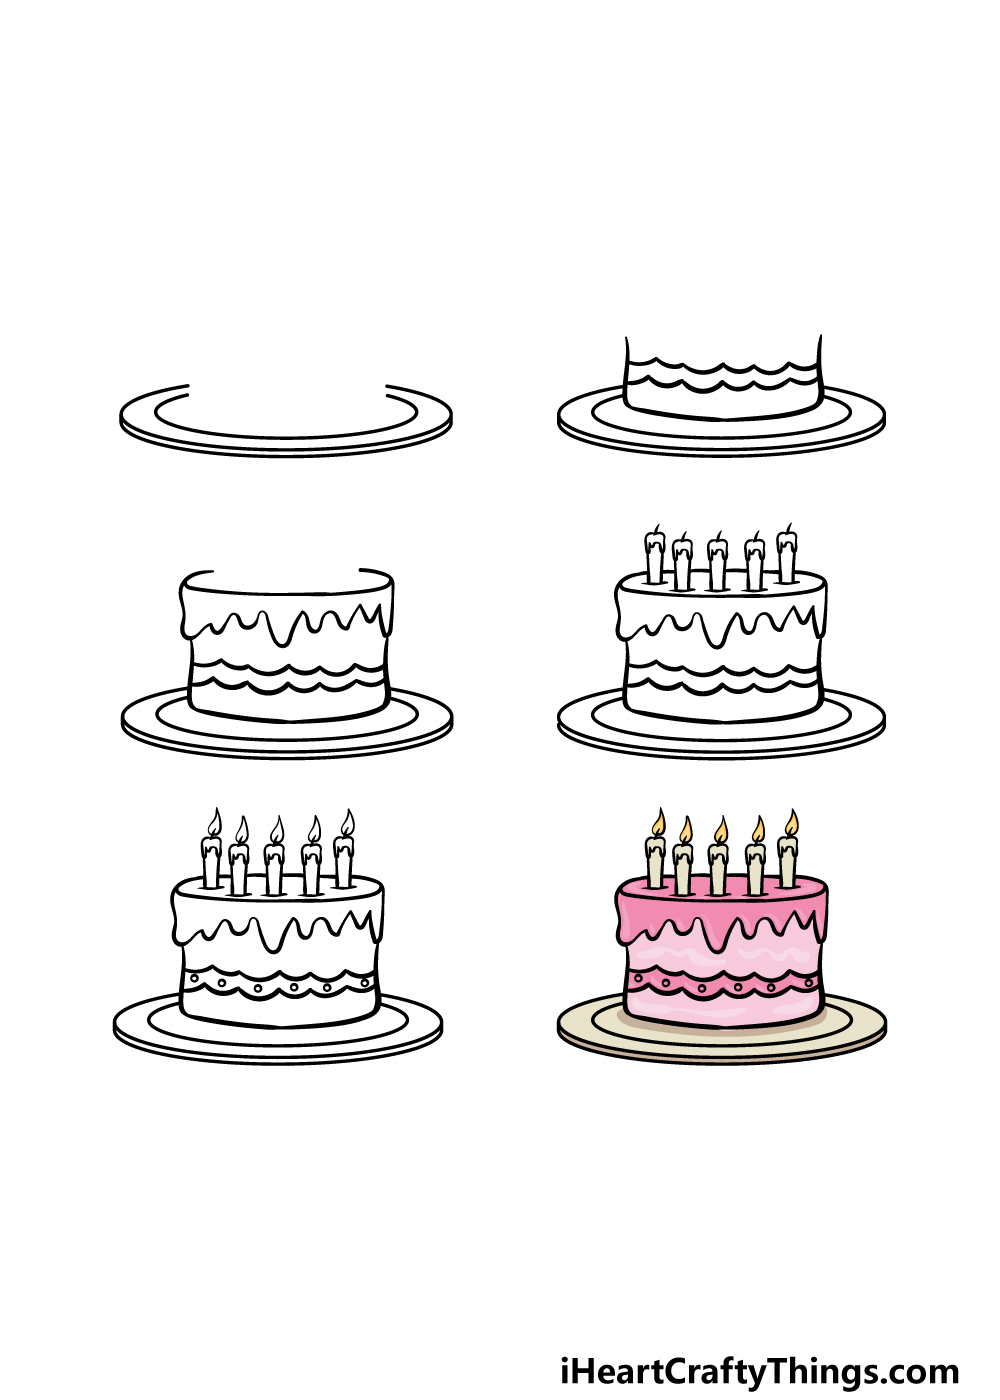 how to draw a cartoon cake in 6 steps